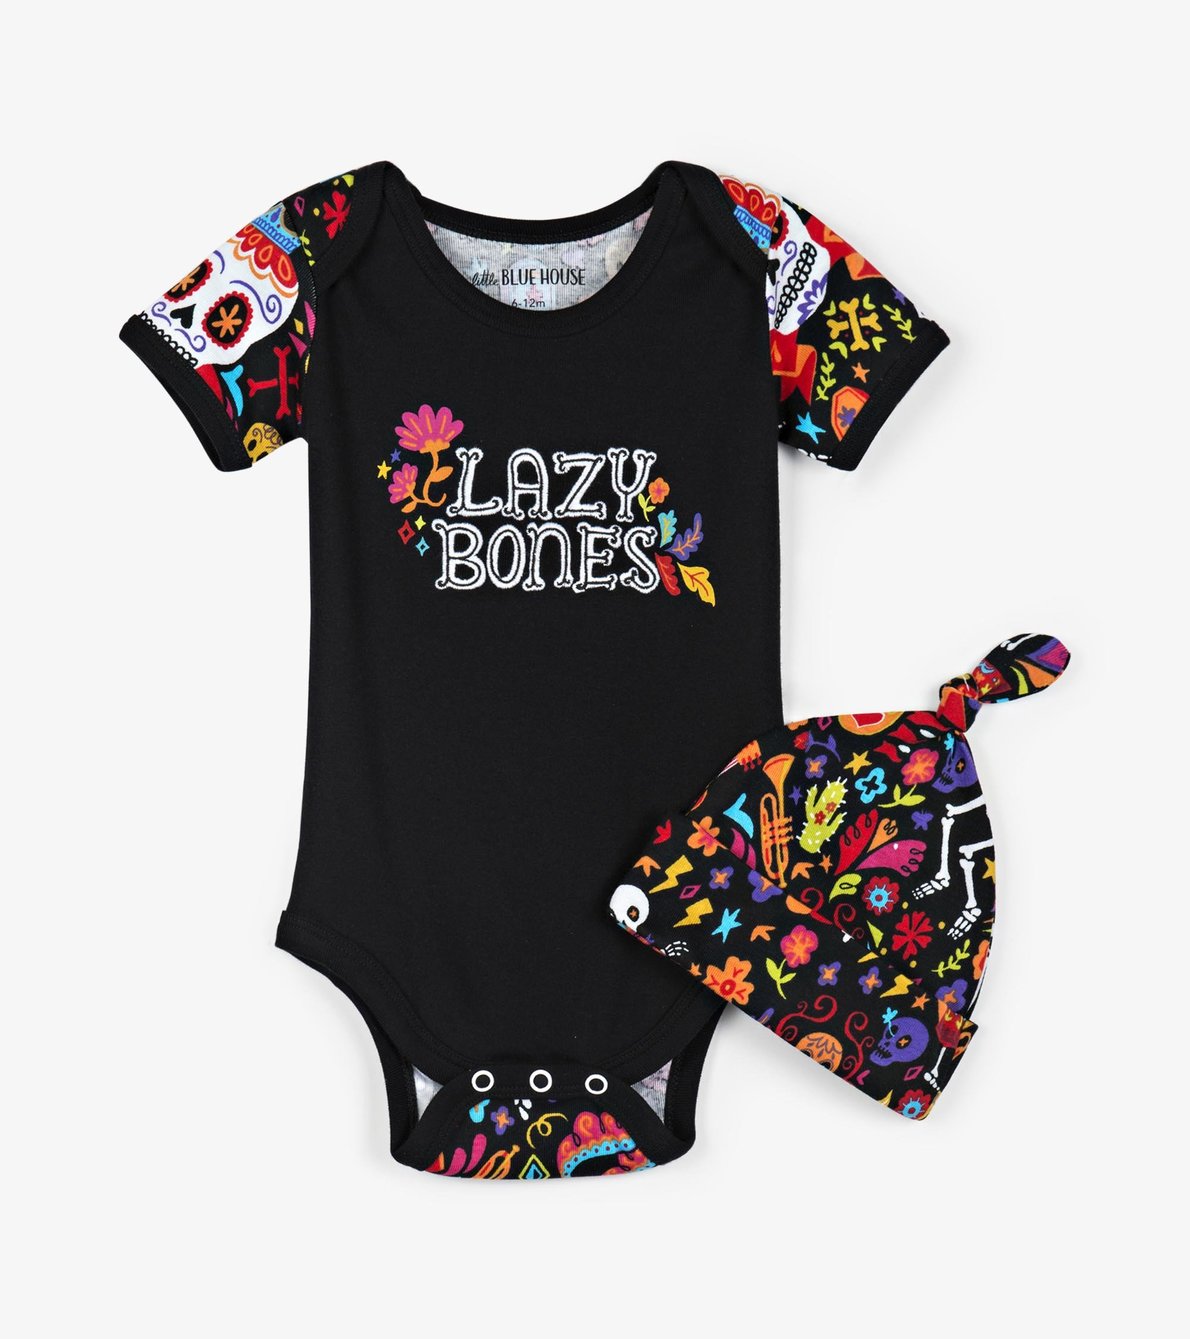 View larger image of "Day Of The Dead" Baby Bodysuit with Hat